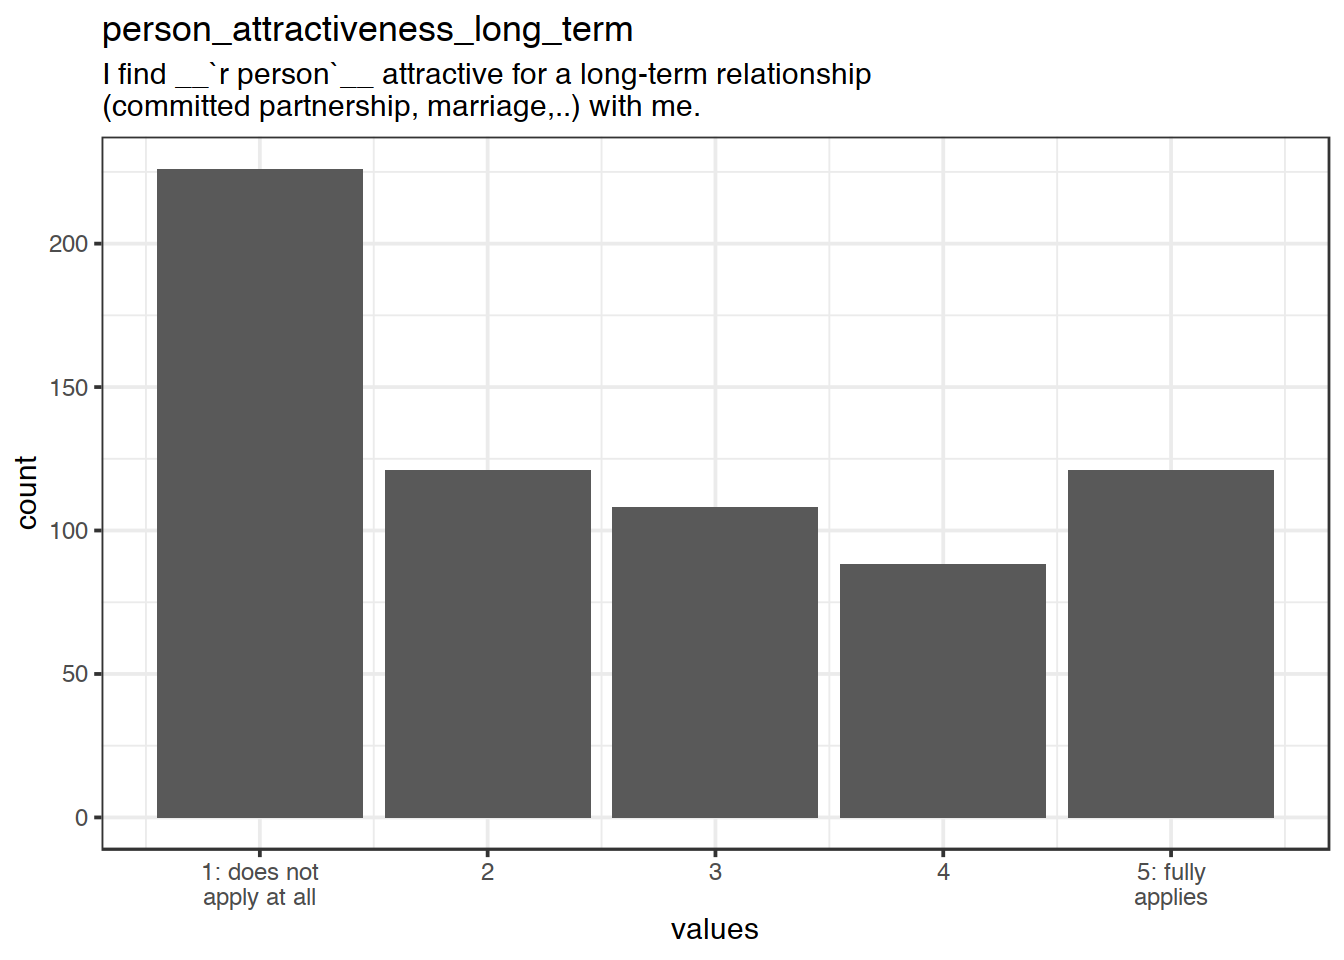 Distribution of values for person_attractiveness_long_term